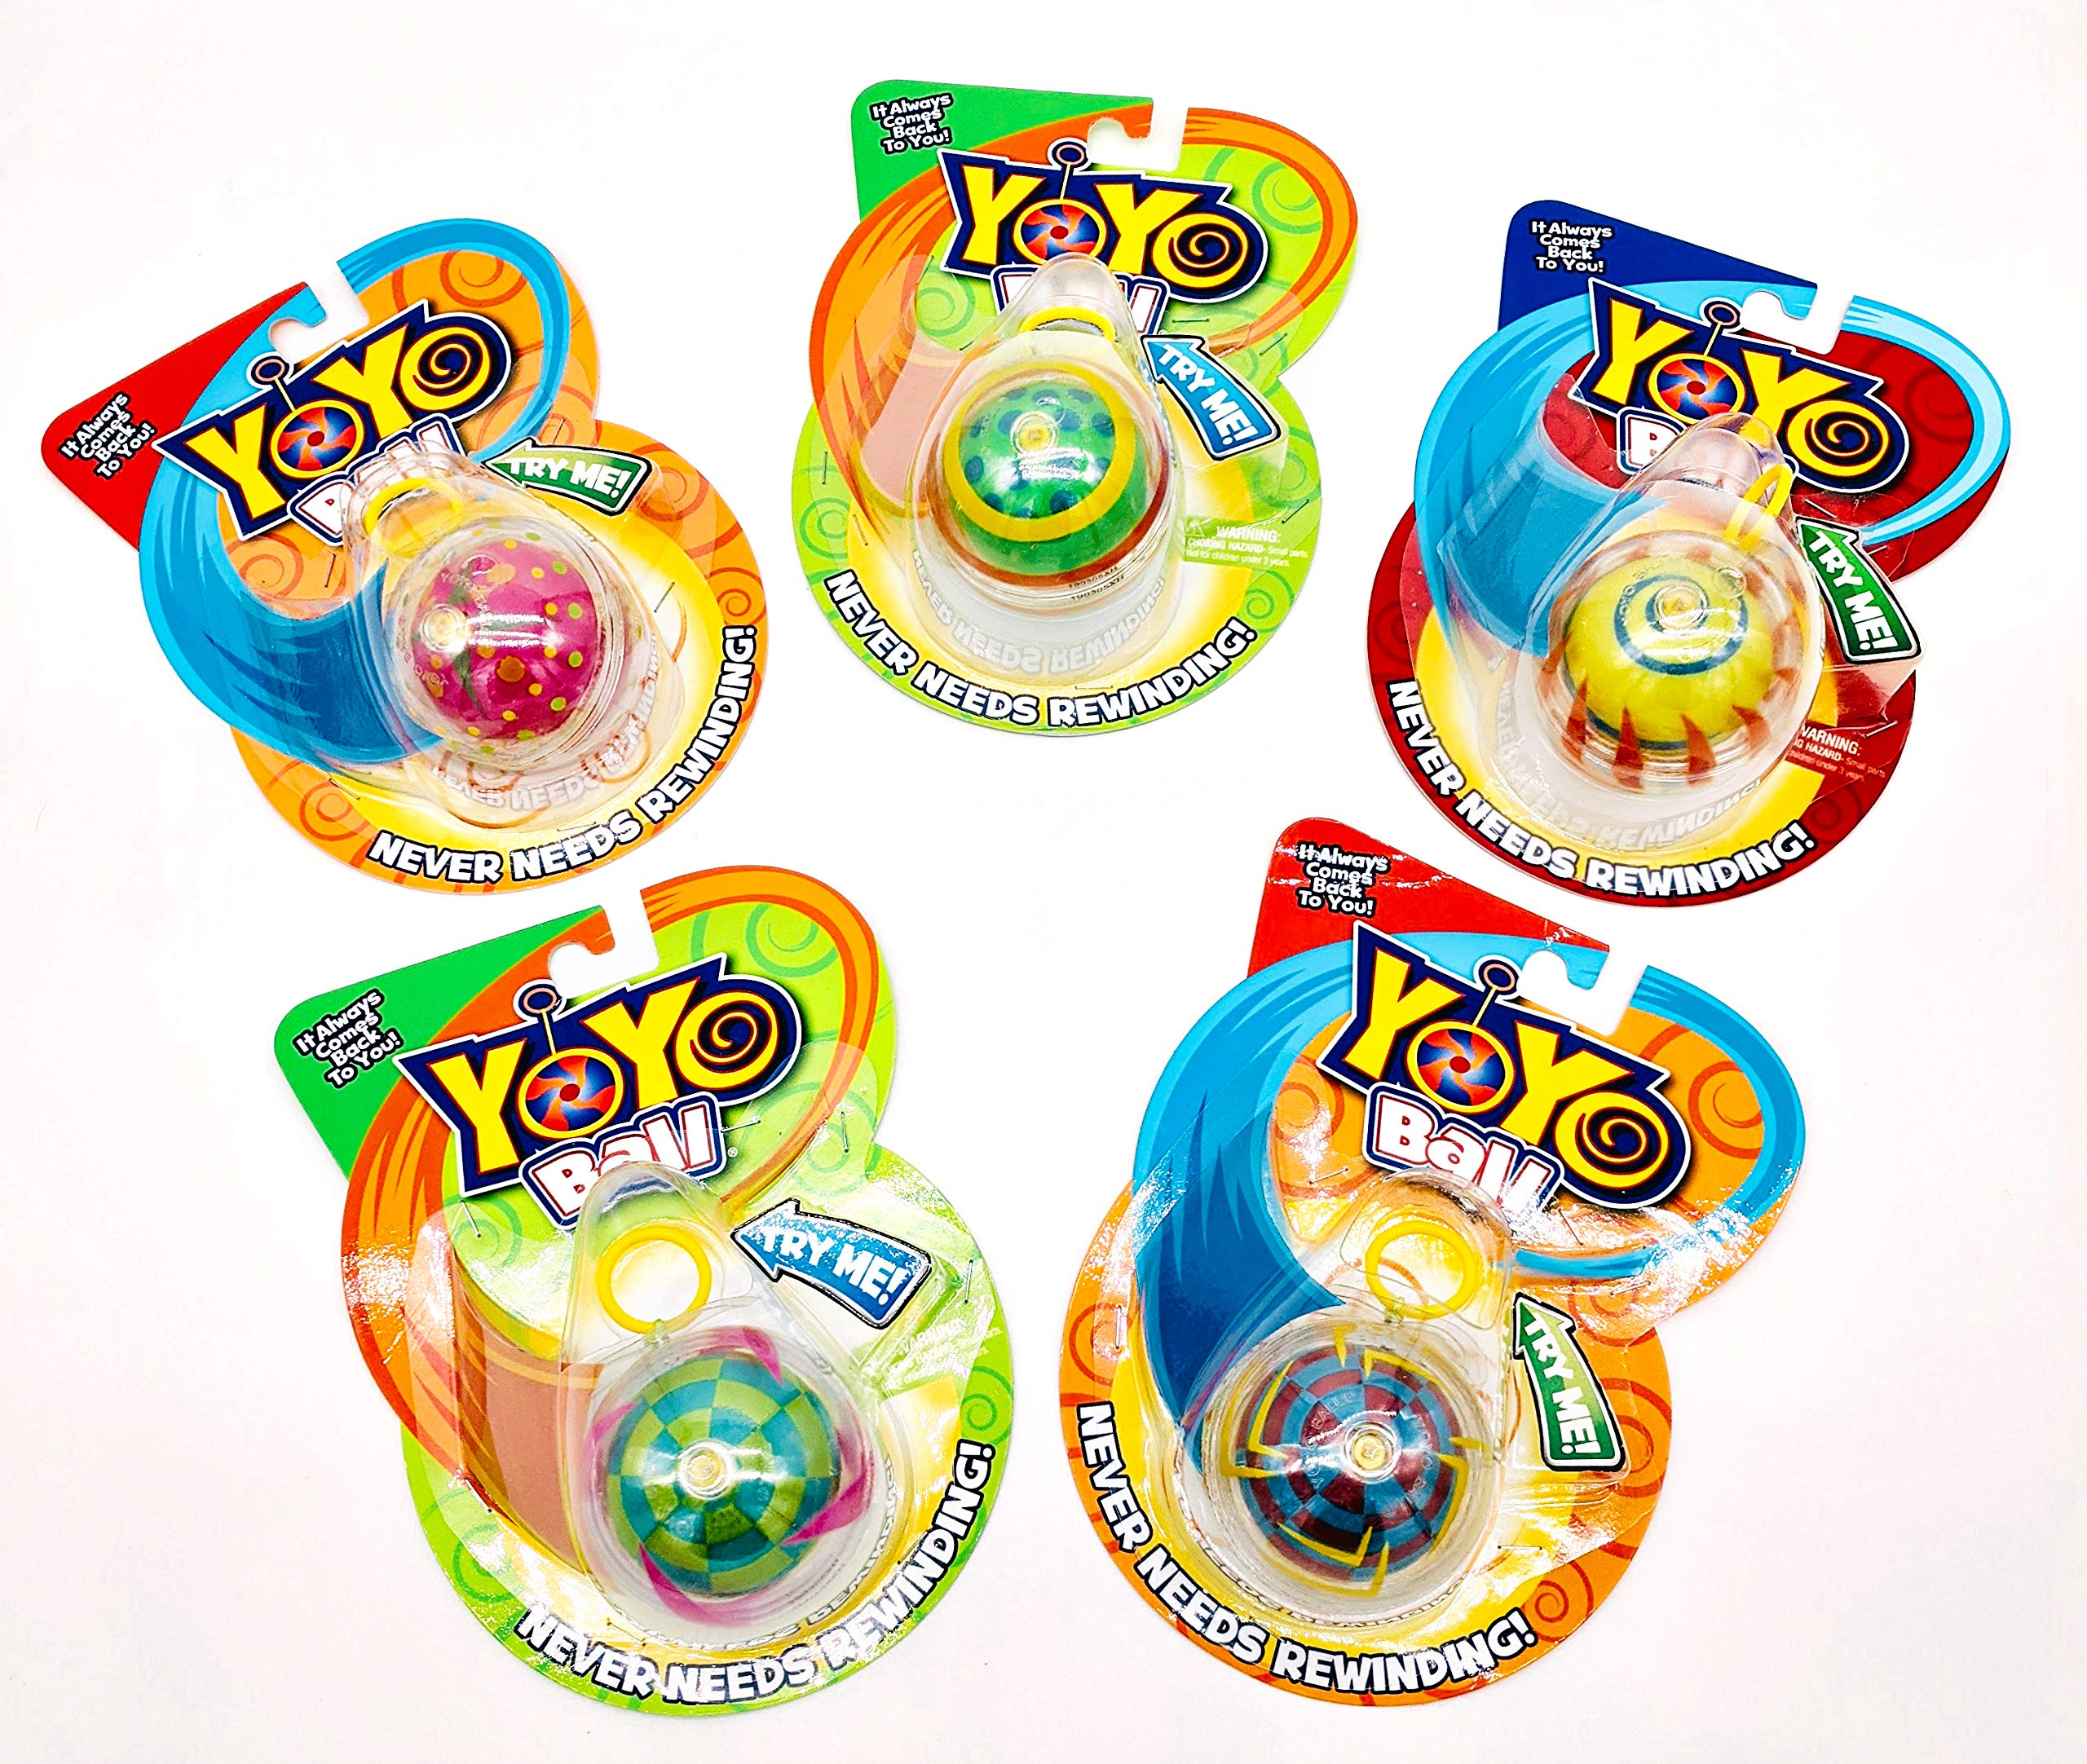 Big Time Toys YoYo Ball Party Pack of 5, As seen on TV, Assorted colors and Patterns, Automatically Returns to You - Never Needs rewinding, cr